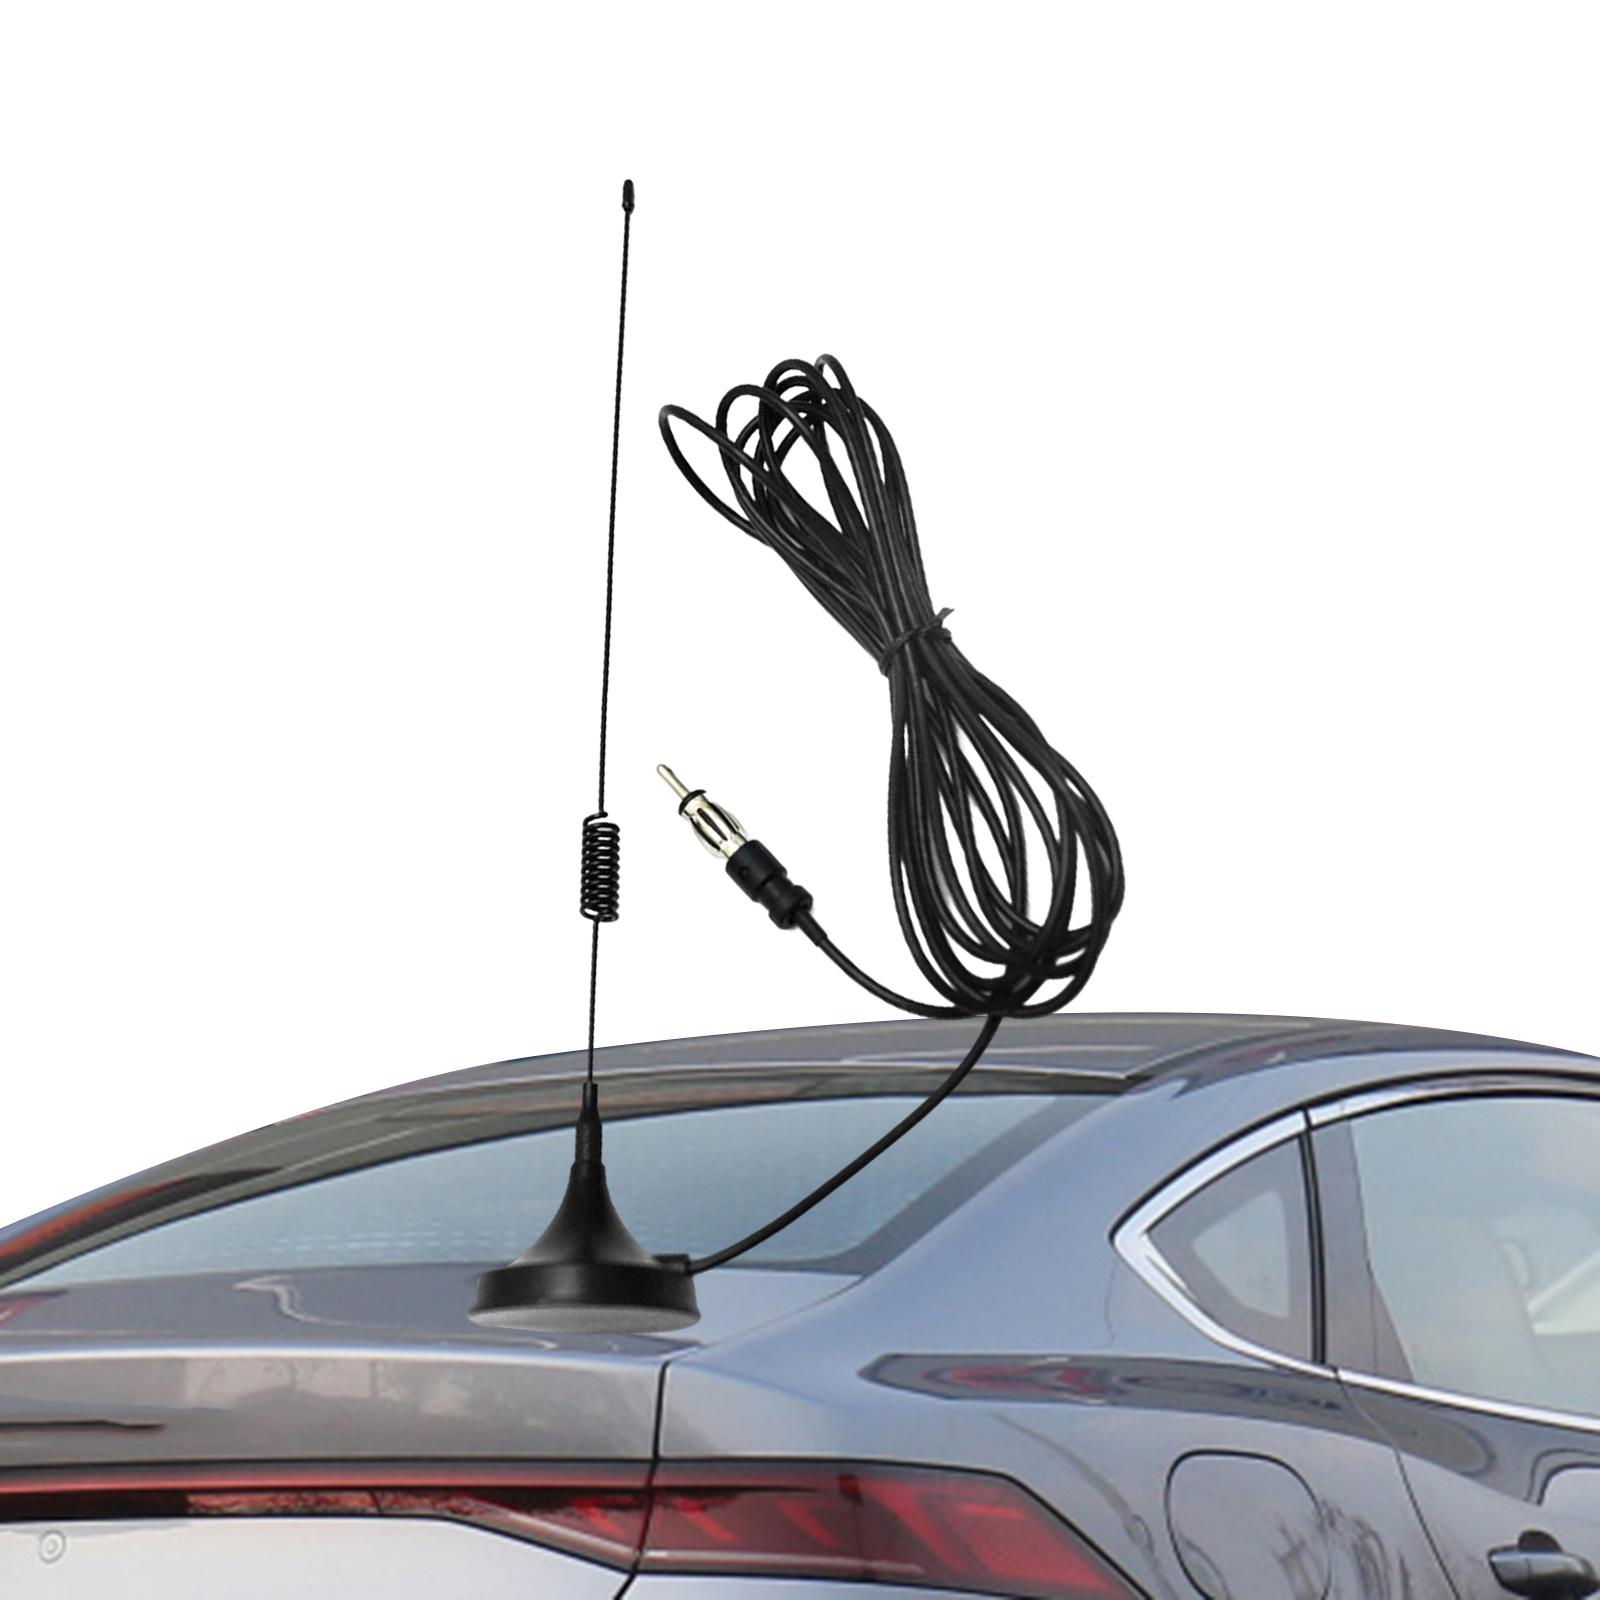 Car FM AM Radio Antenna Aerial Magnetic Base for Vehicle Boat SUV